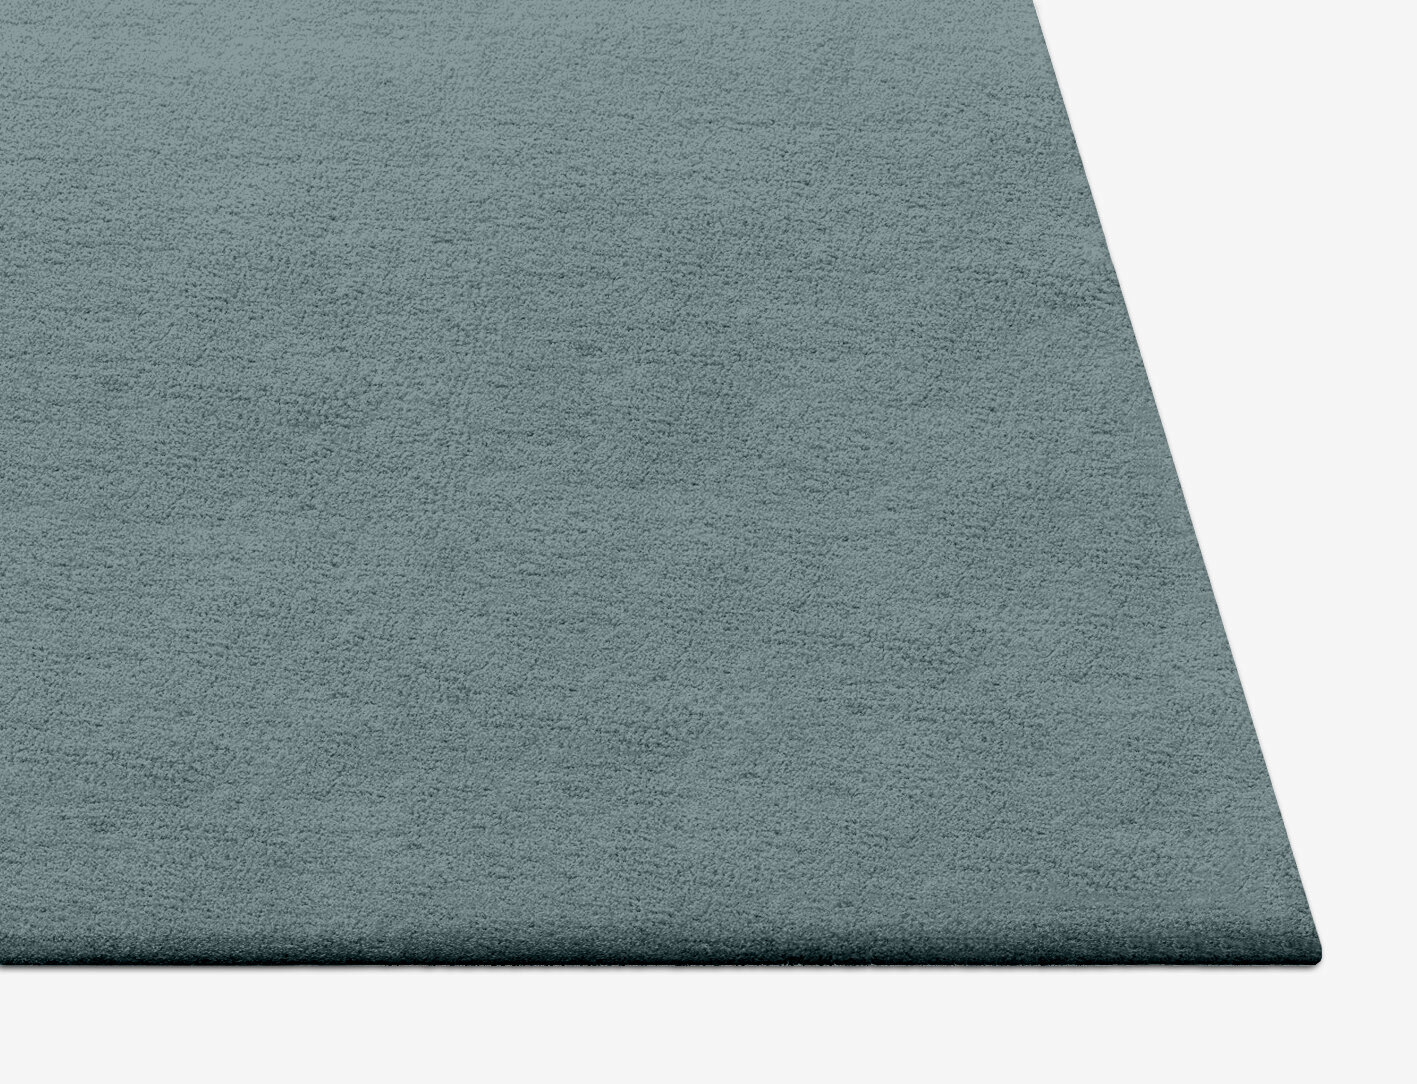 RA-BG09 Solid Colors Square Hand Tufted Pure Wool Custom Rug by Rug Artisan